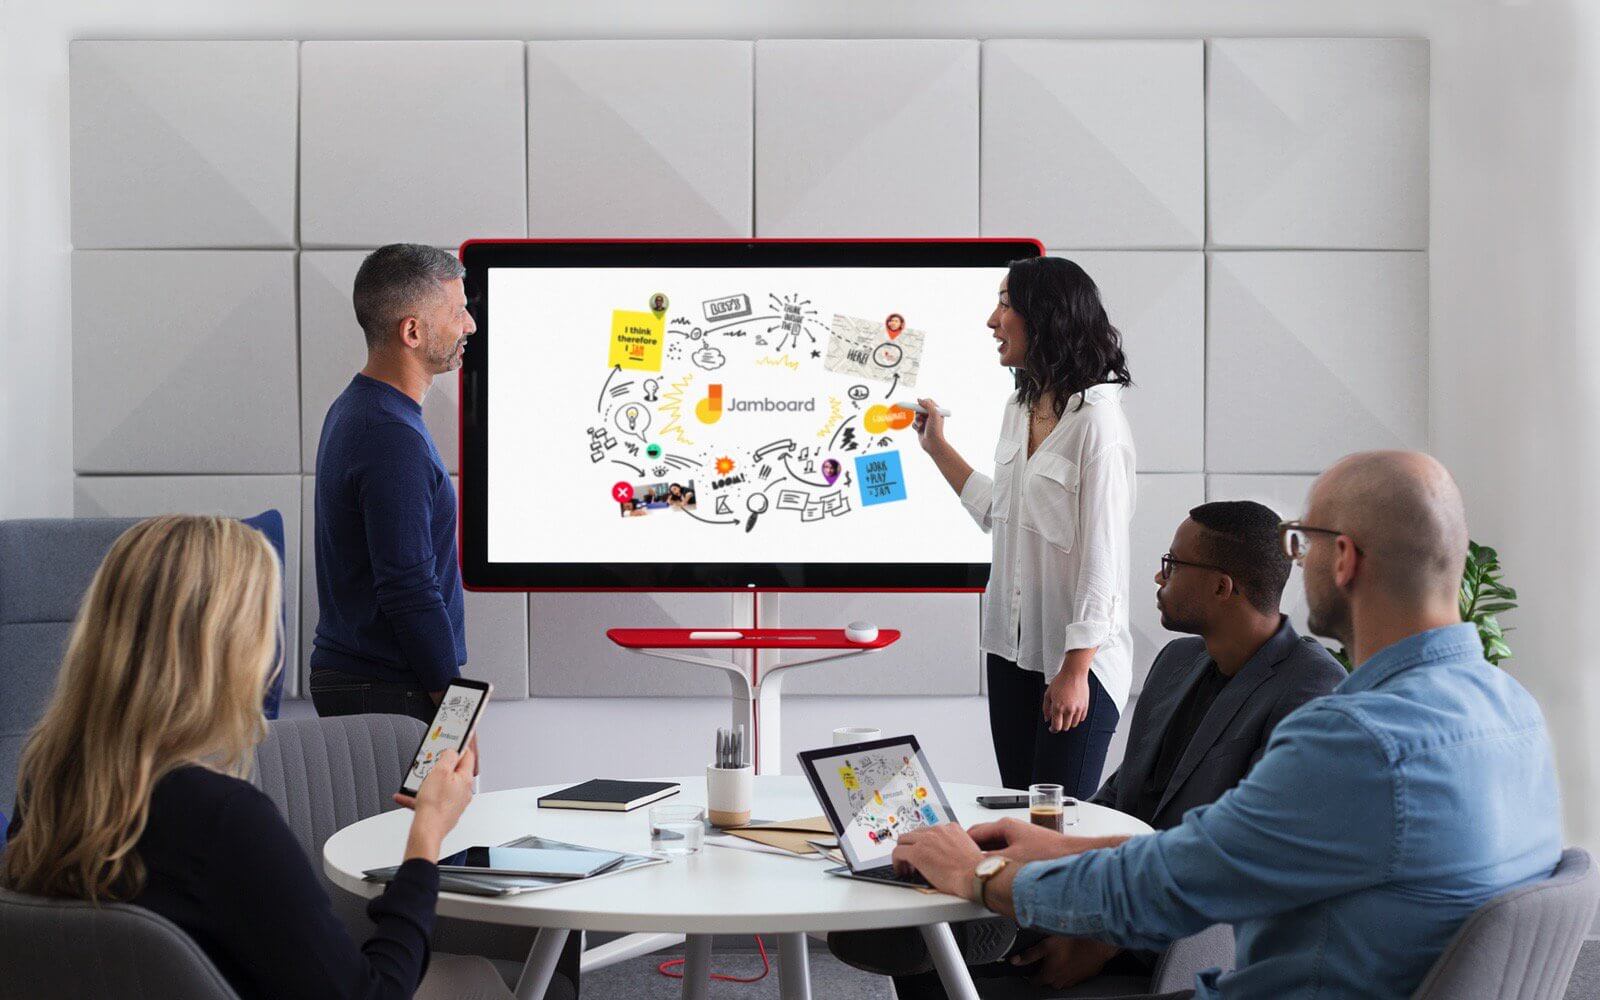 Google's Jamboard is a 4K digital whiteboard for collaboration